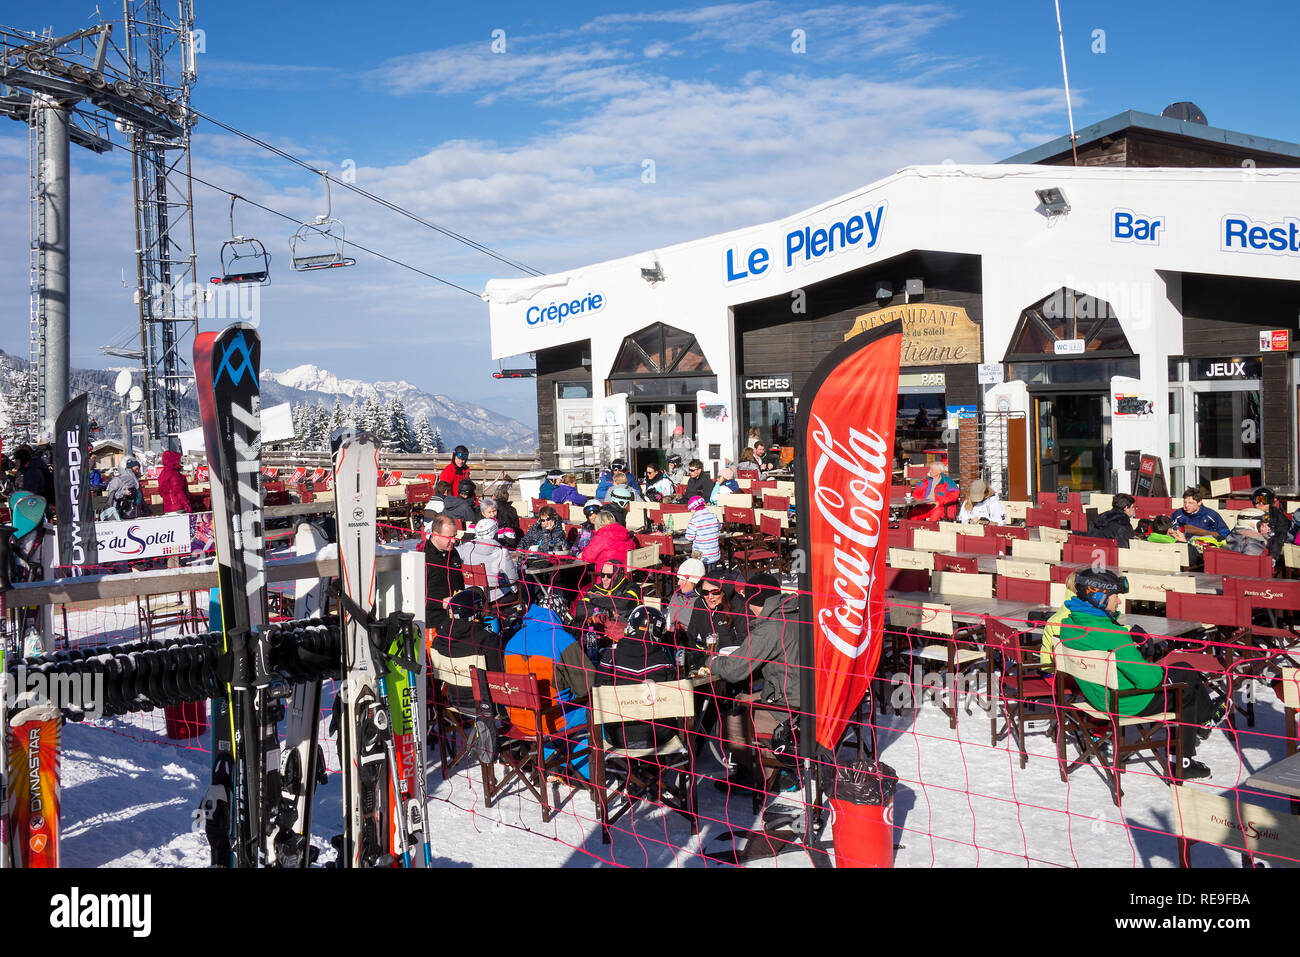 The Lovely Le Pleney Restaurant and Bar at the Top of the Gondola Above Morzine Ski Resort in French Alps Haute Savoie Portes du Soleil France Stock Photo